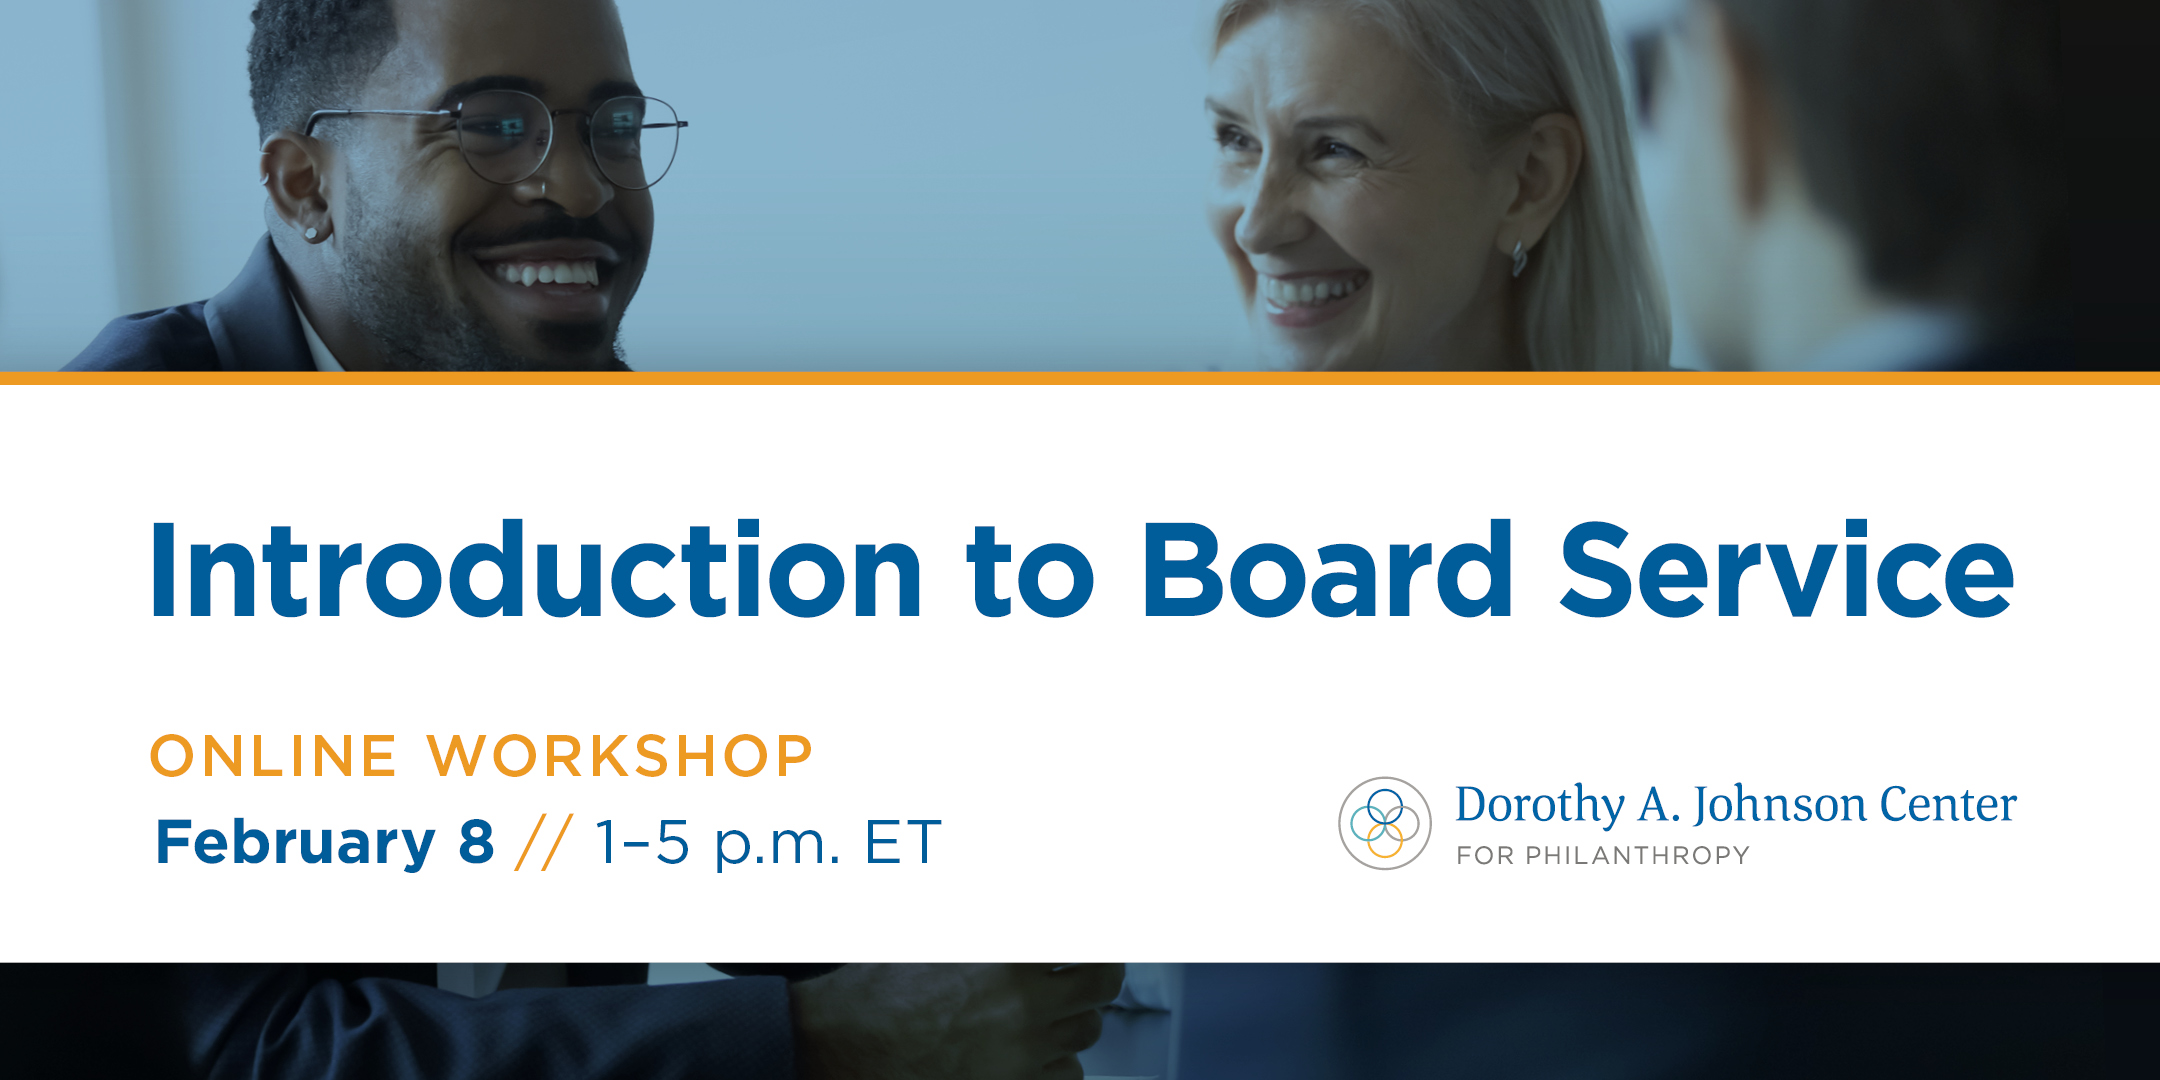 Introduction to Board Service